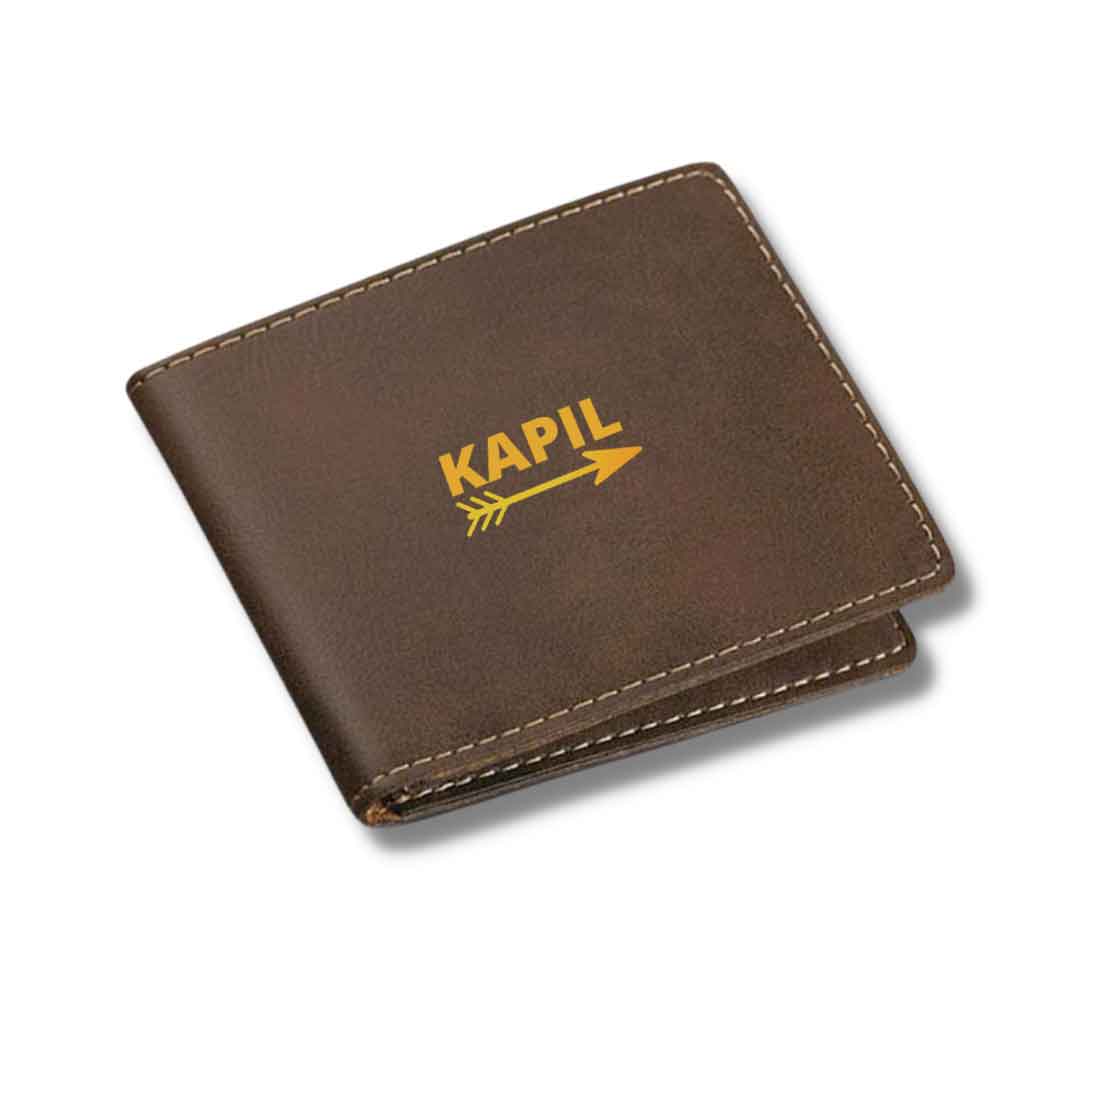 Customized Wallets With Name for Men Personalised Gift - Arrow Nutcase